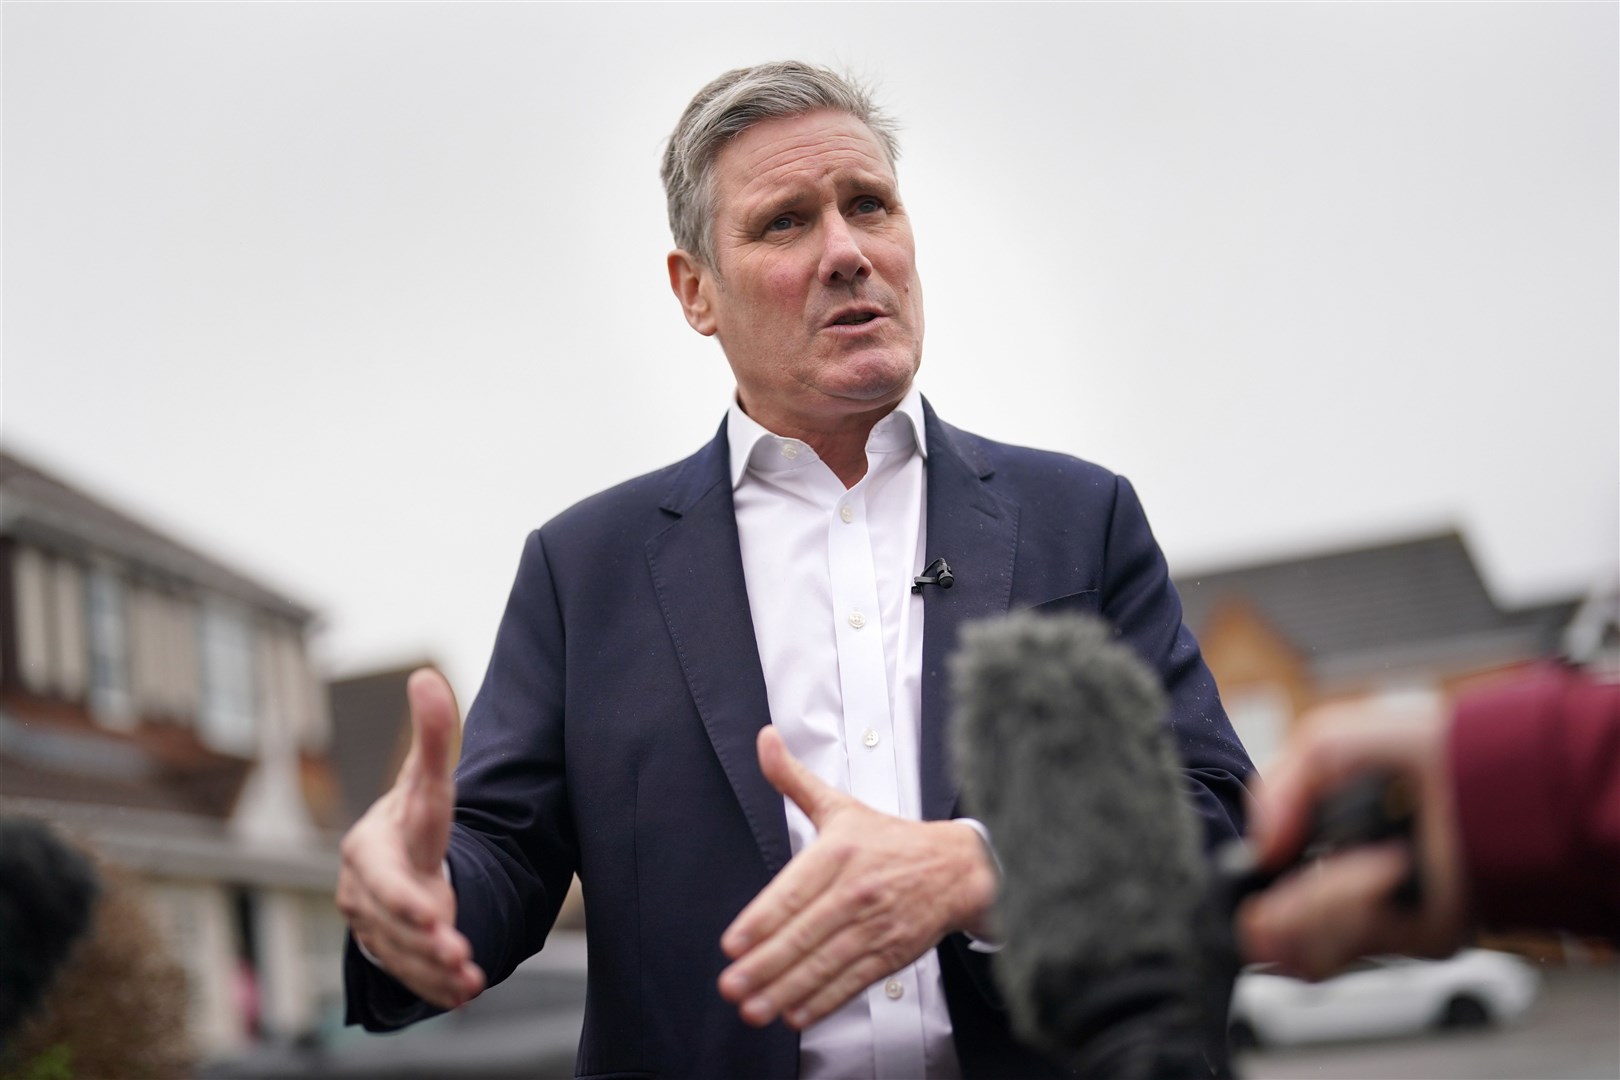 Voters are not sure what Sir Keir Starmer stands for, Tory MP Penny Mordaunt has said (Jacob King/PA)